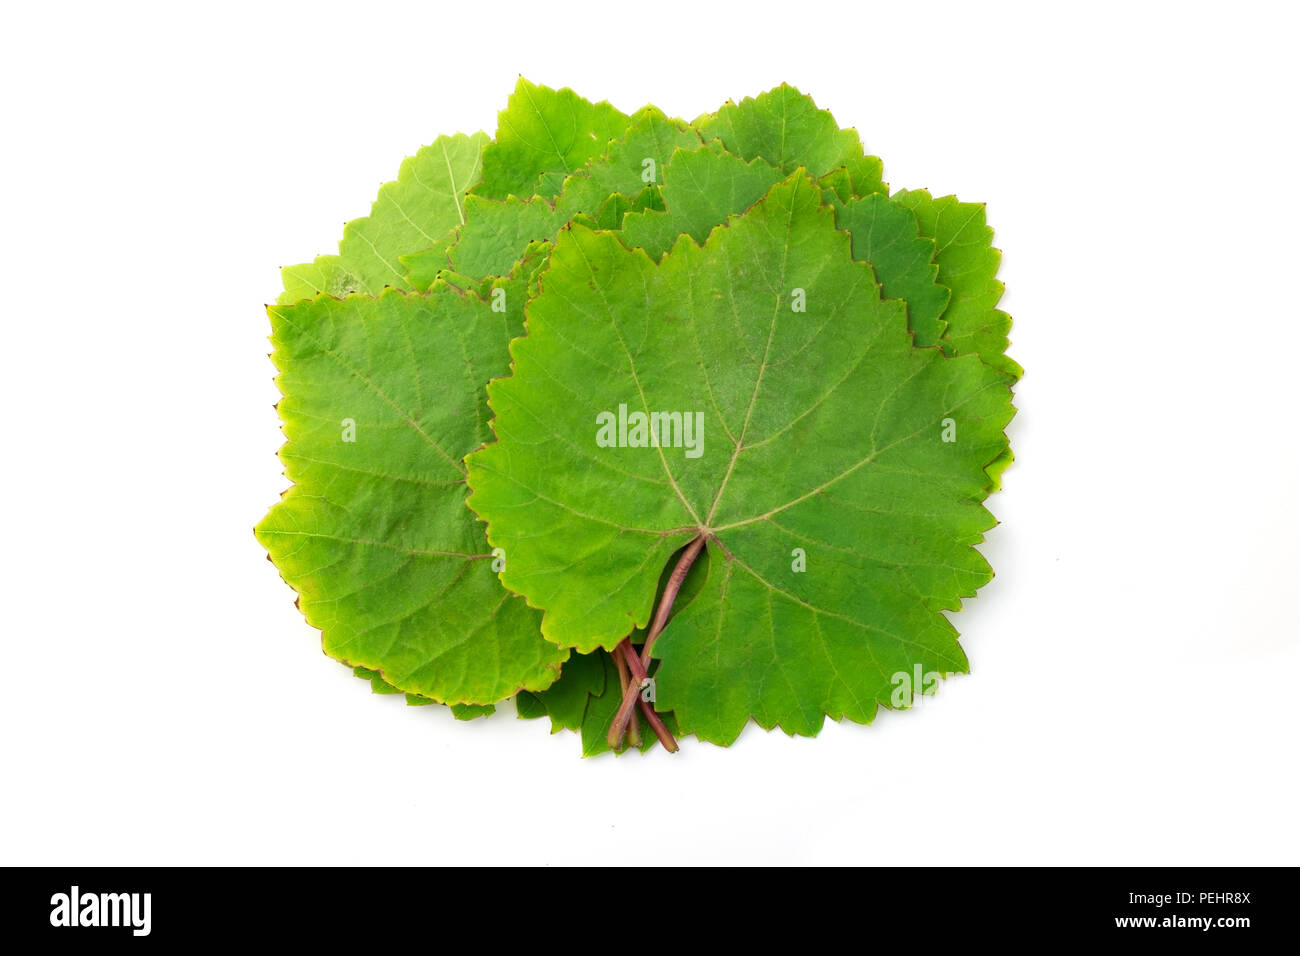 Grape leaves on a white background Stock Photo